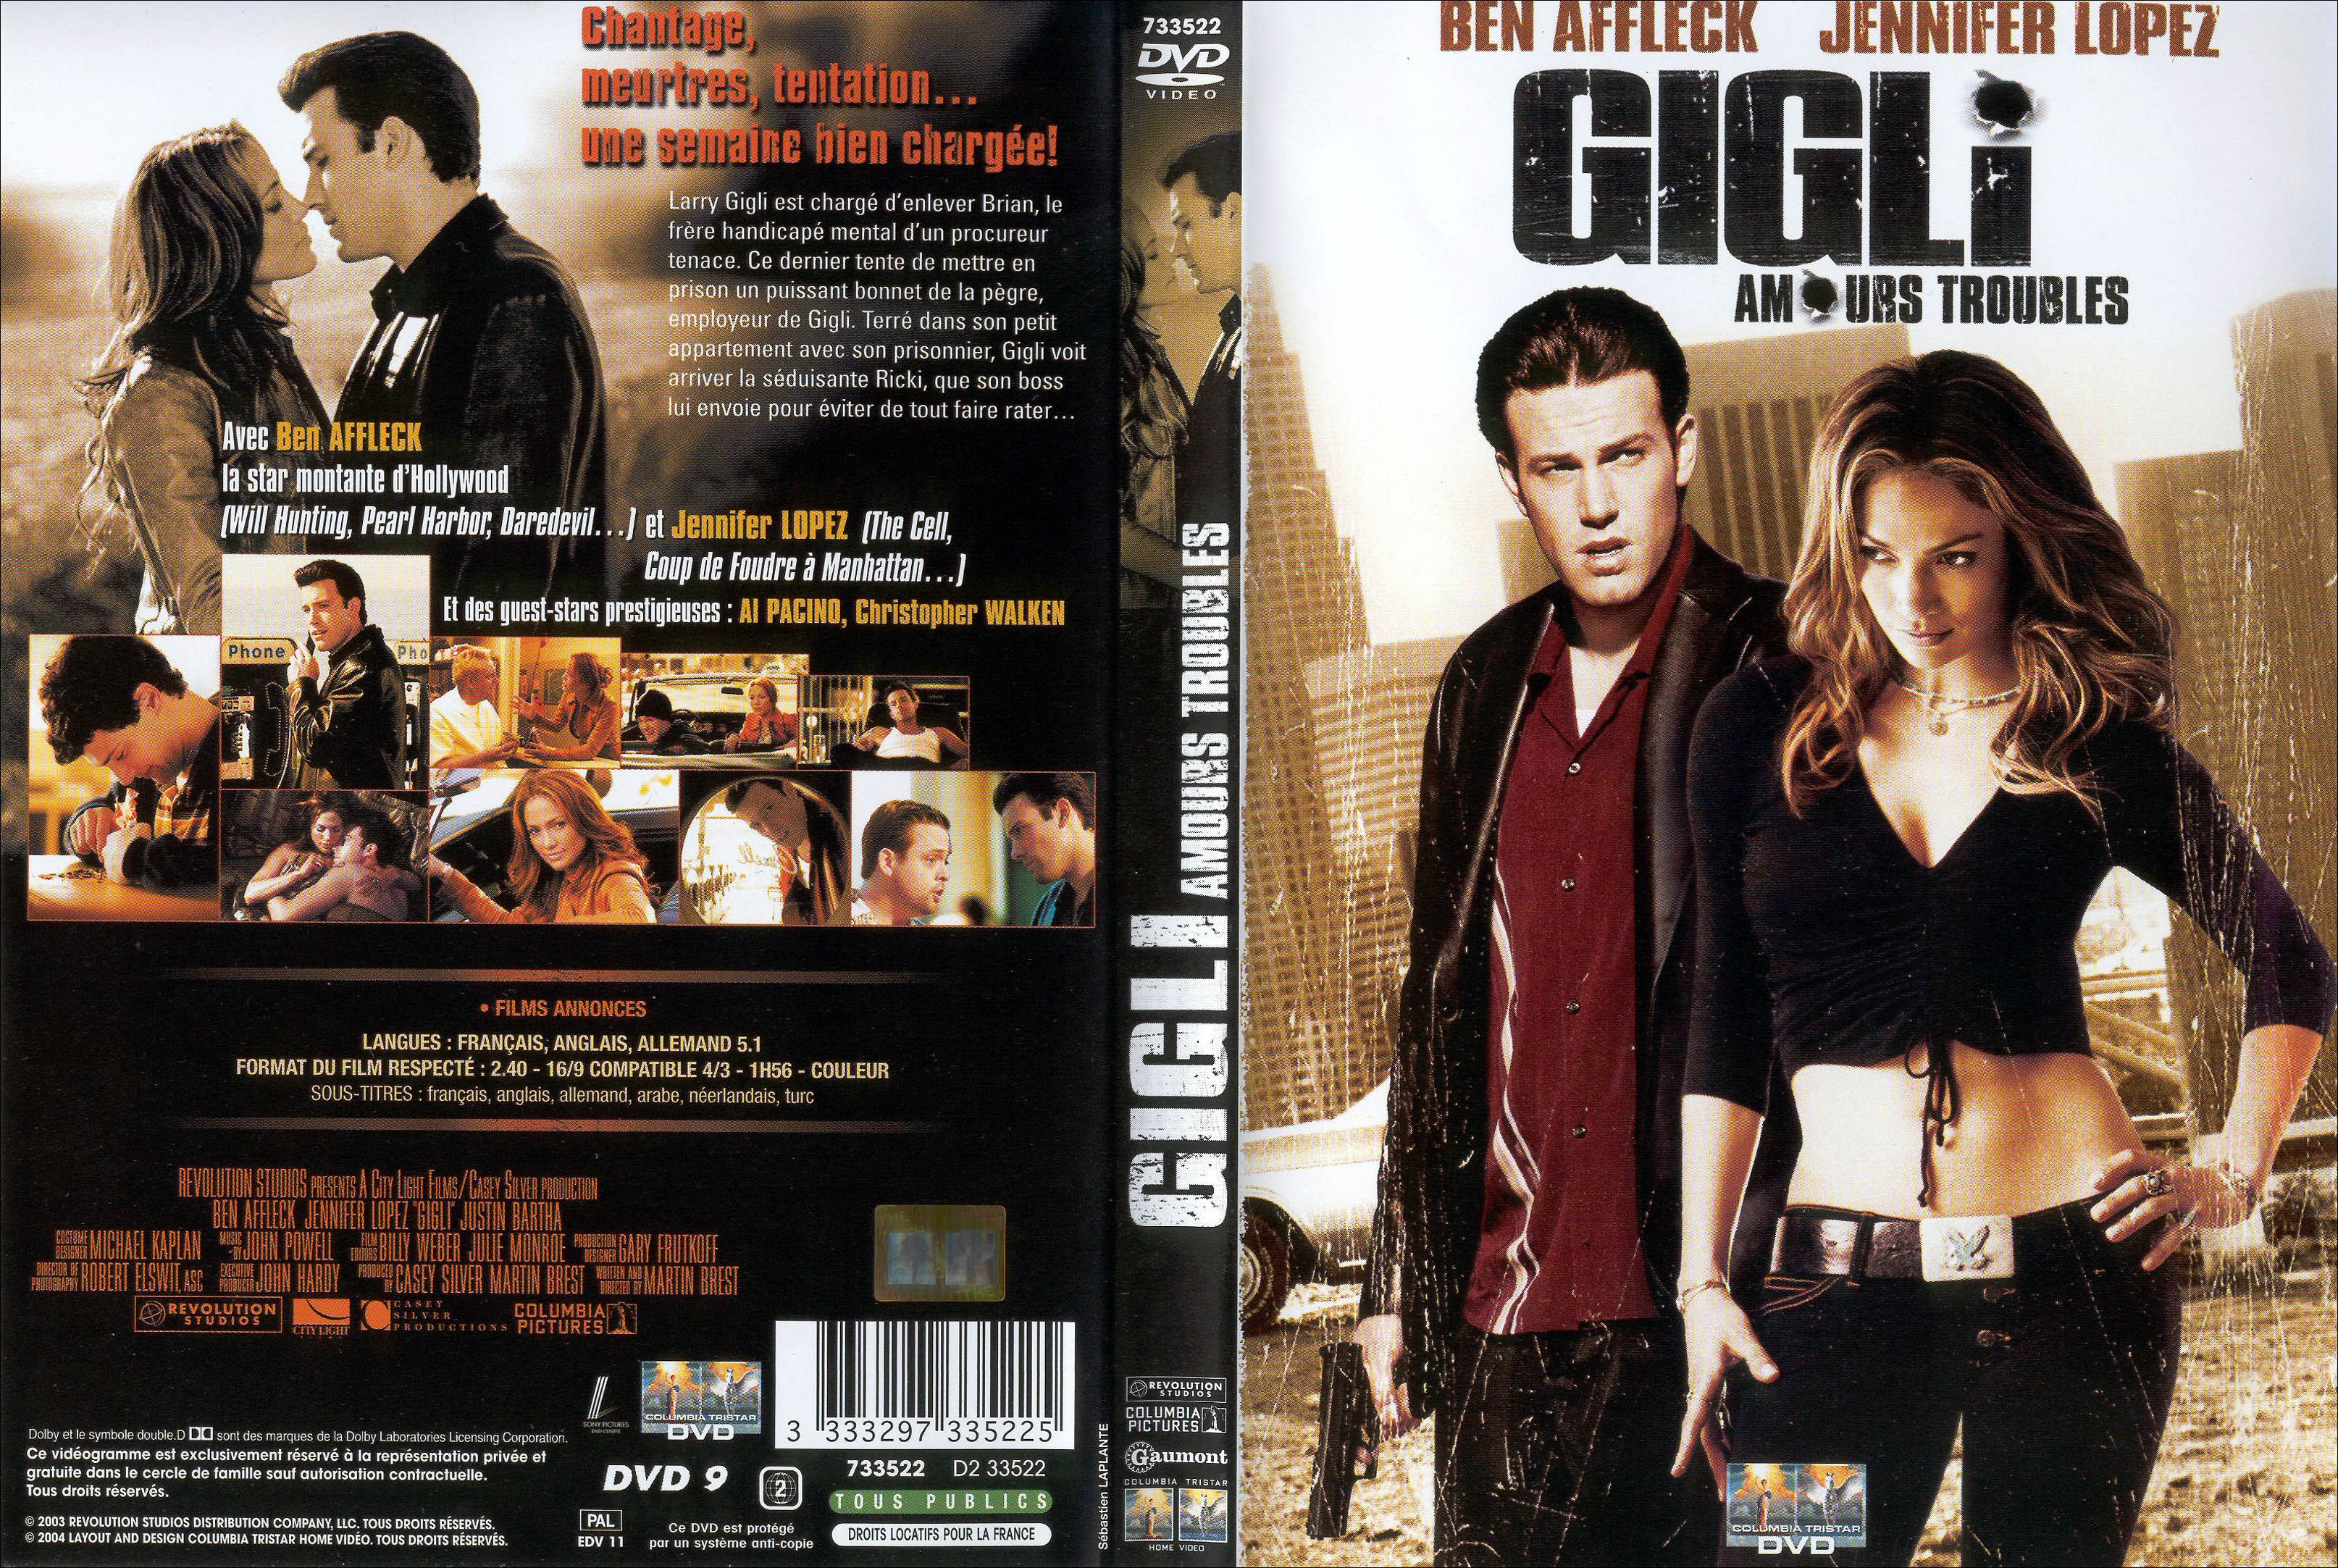 Jaquette DVD Gigli Amours Troubles